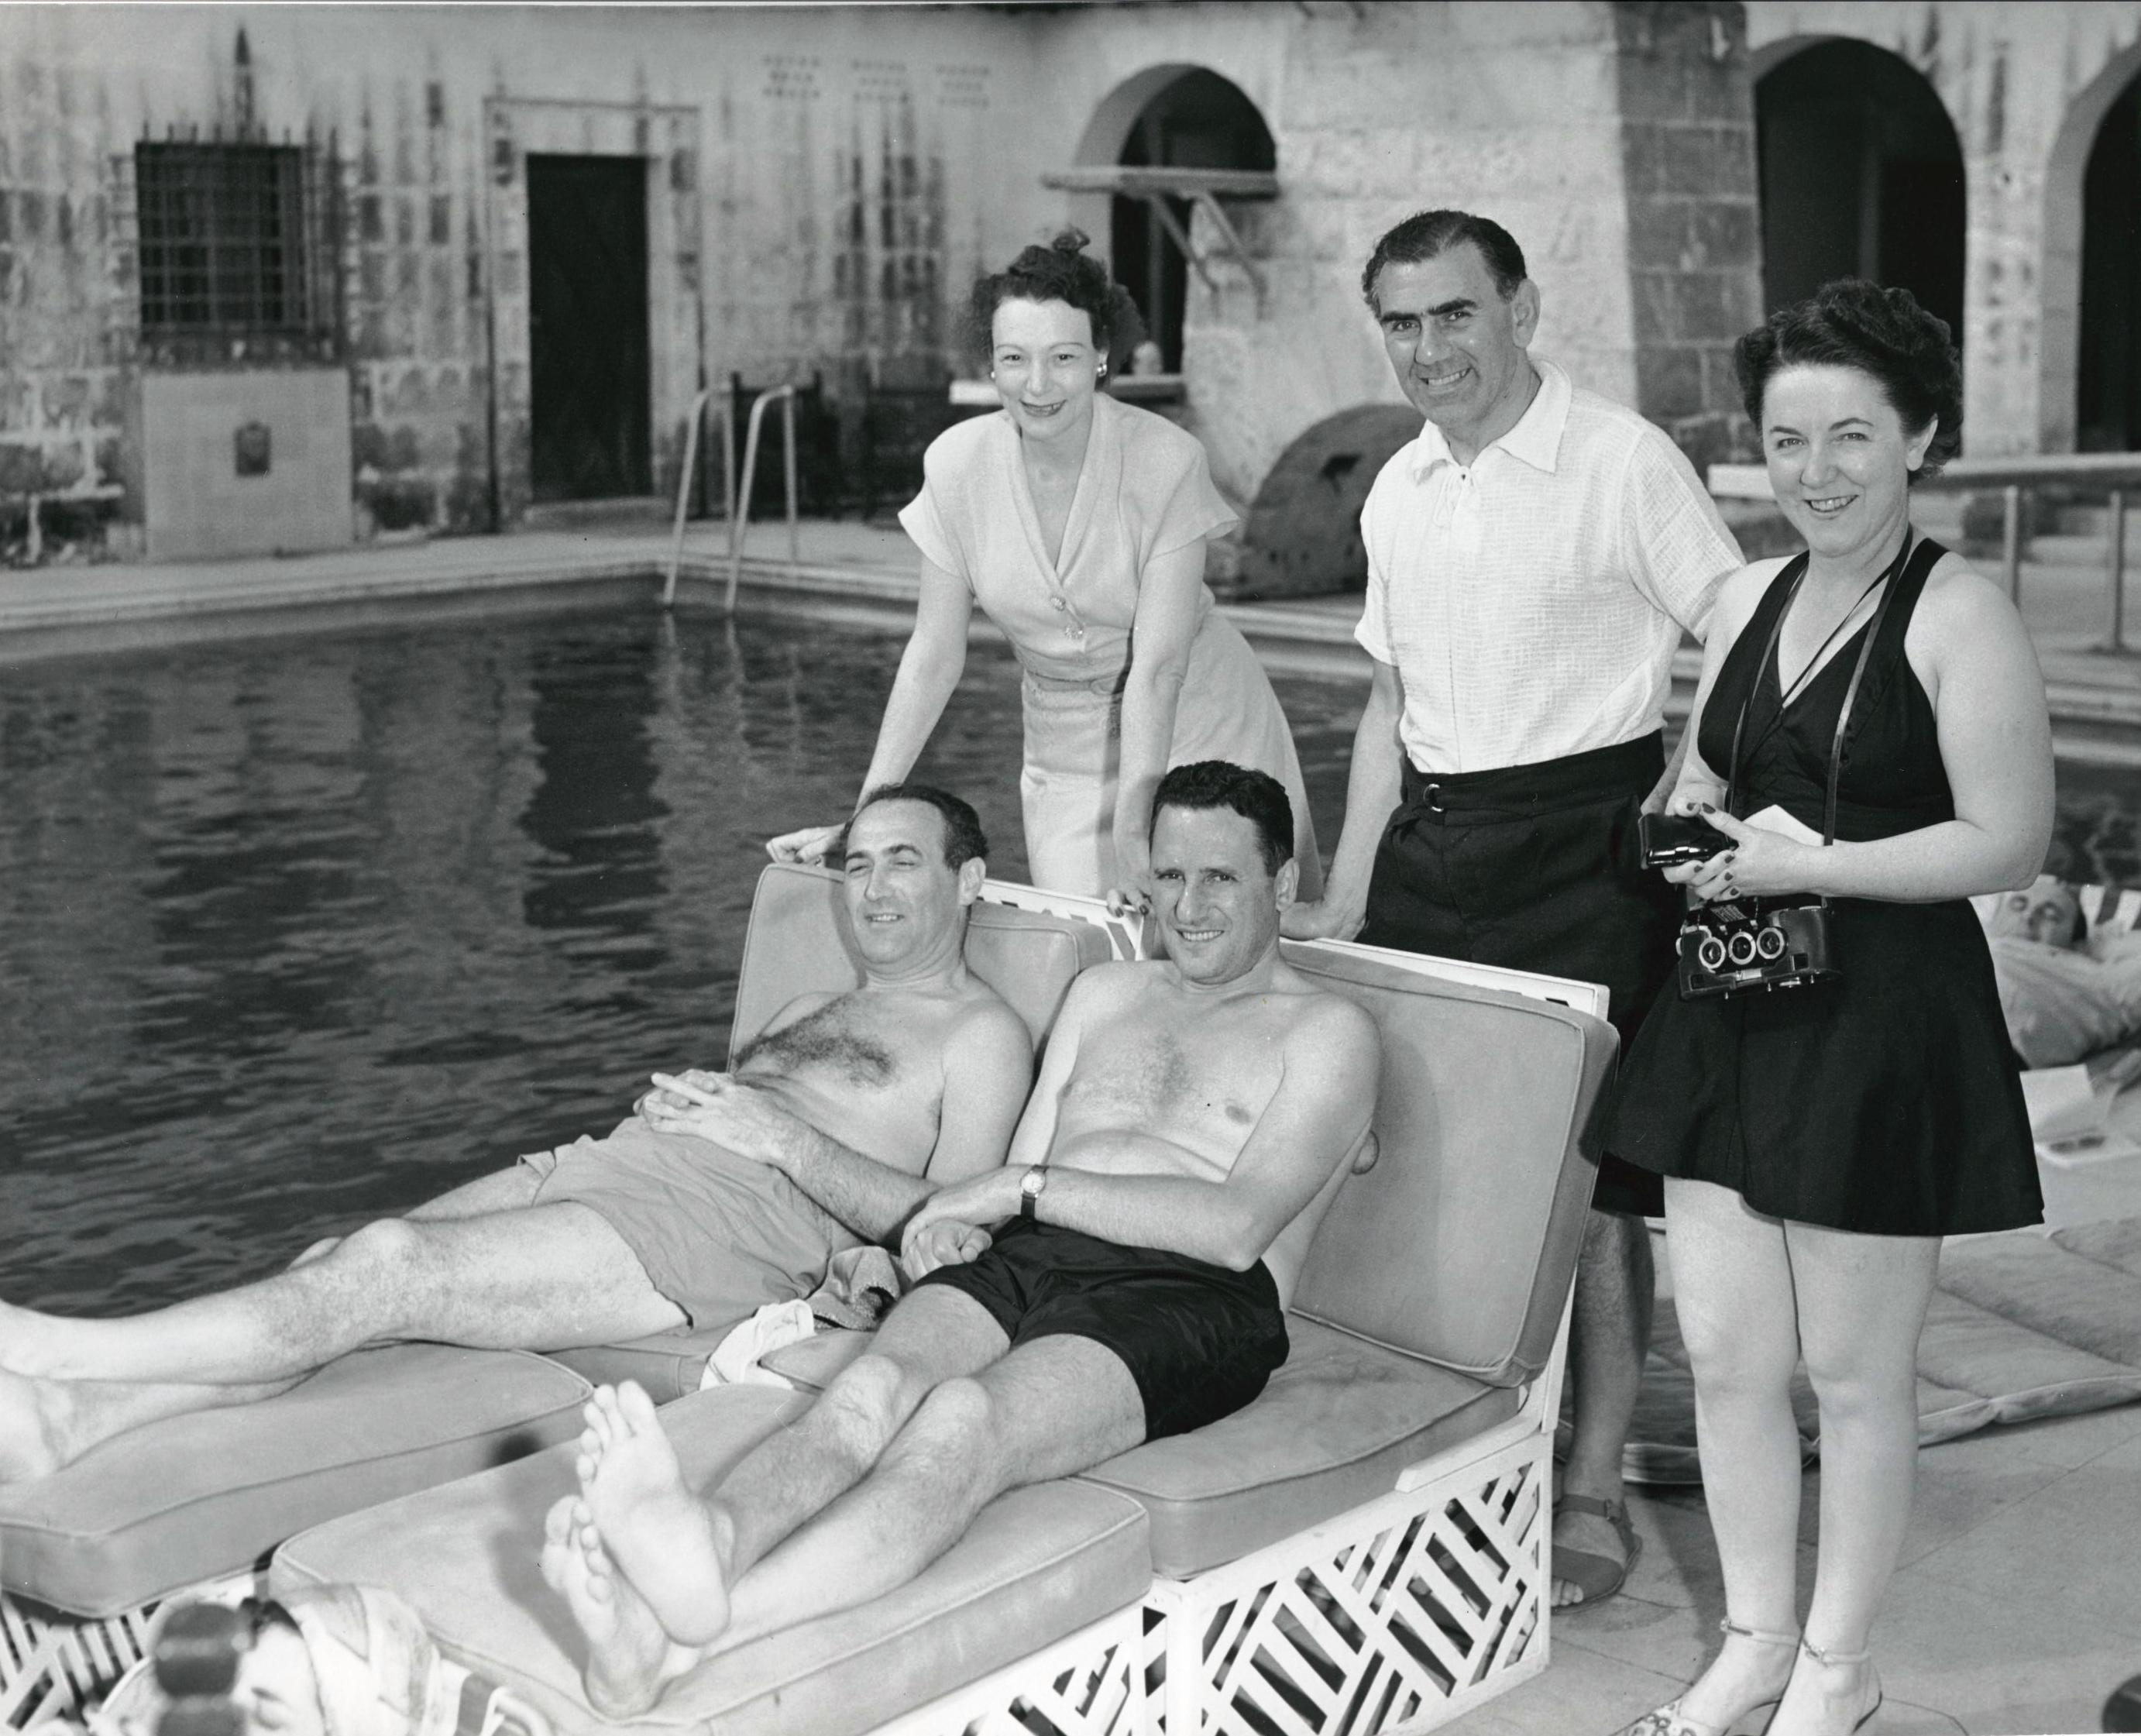 Charles Goren and Sidney Silodor poolside at the 1950 Bermuda Bowl